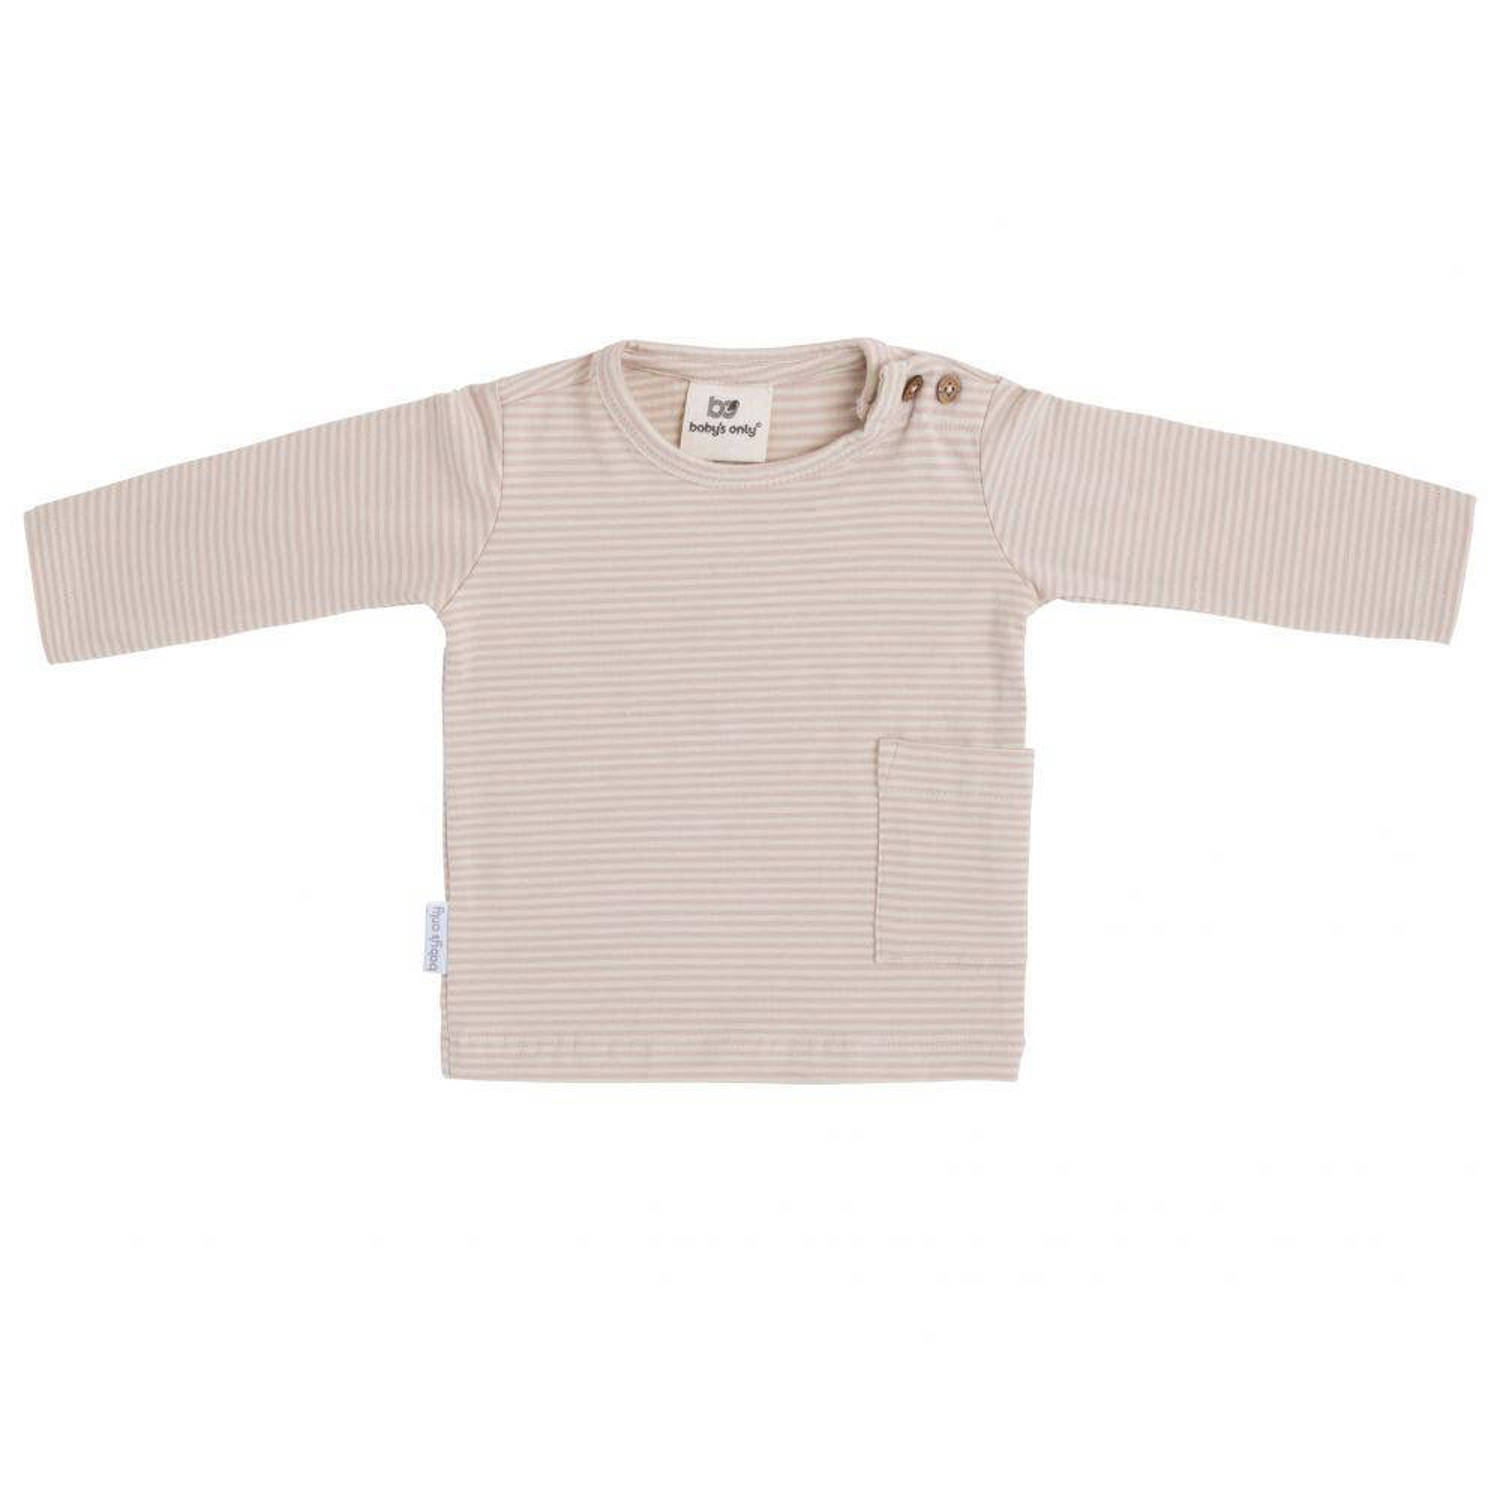 Baby's Only longsleeve Stripe oudroze off white